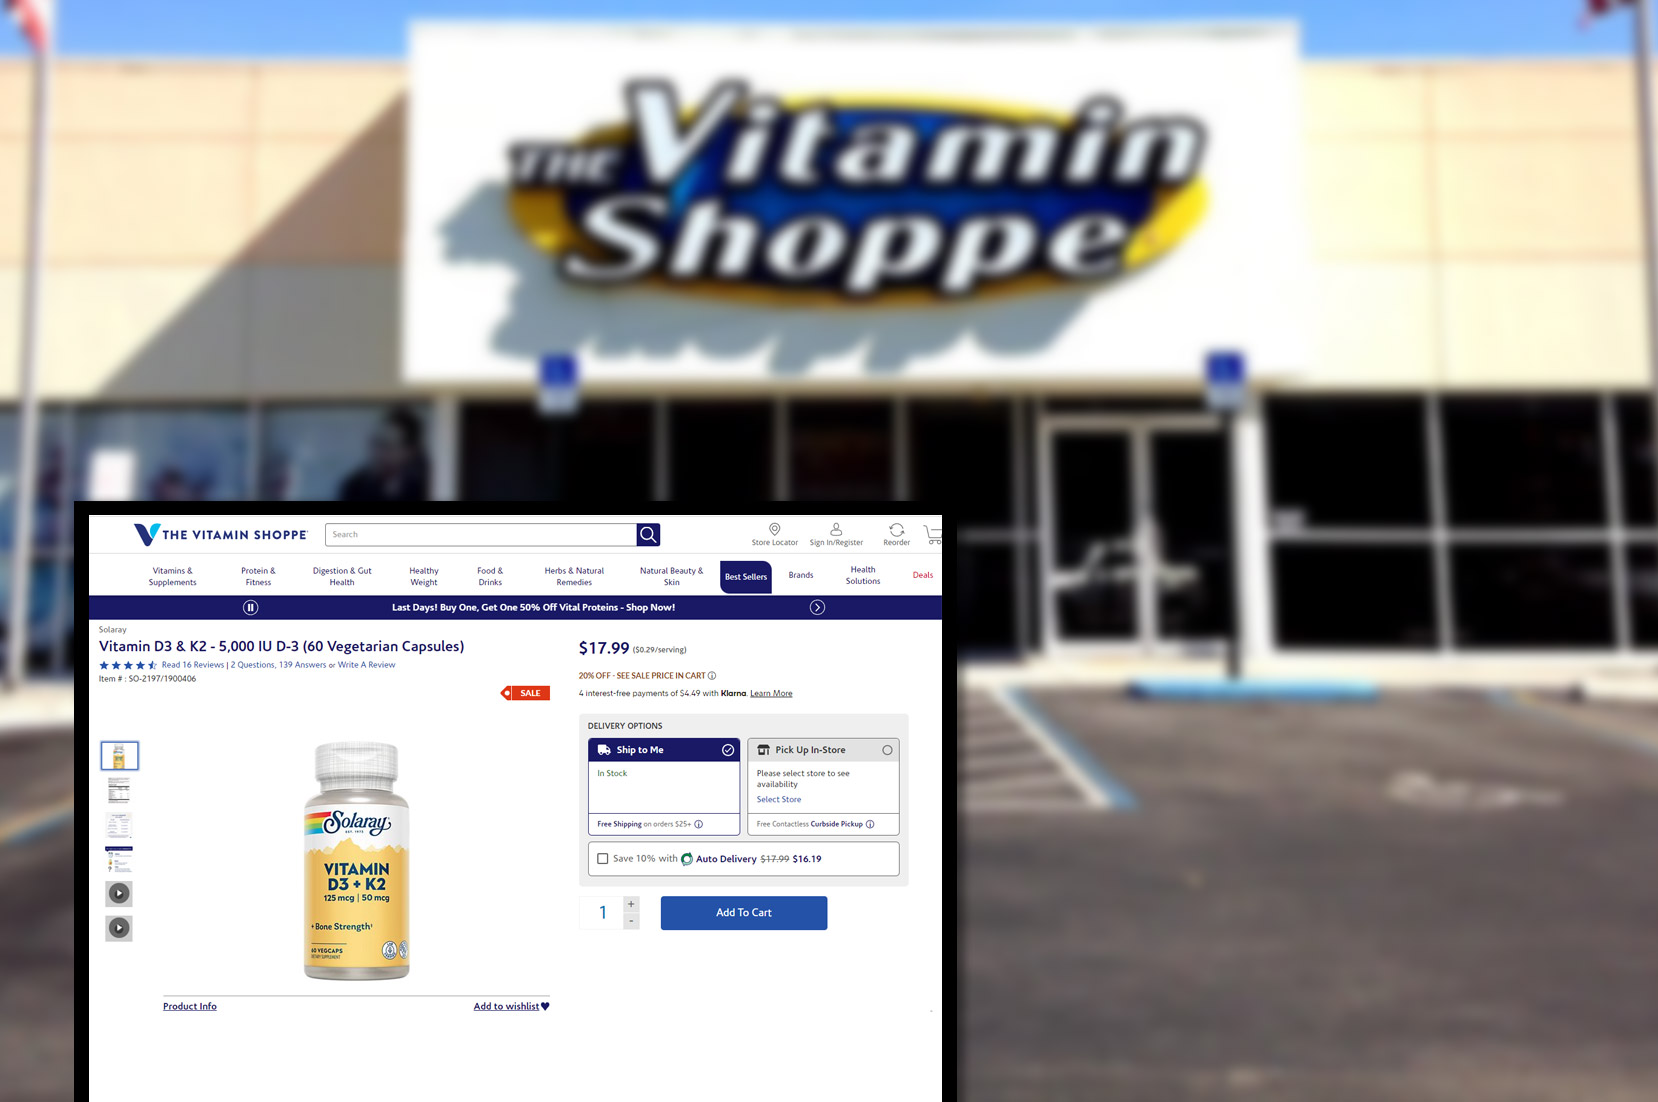 vitaminshoppe-comproduct-pricing-information-and-image-scraping-services